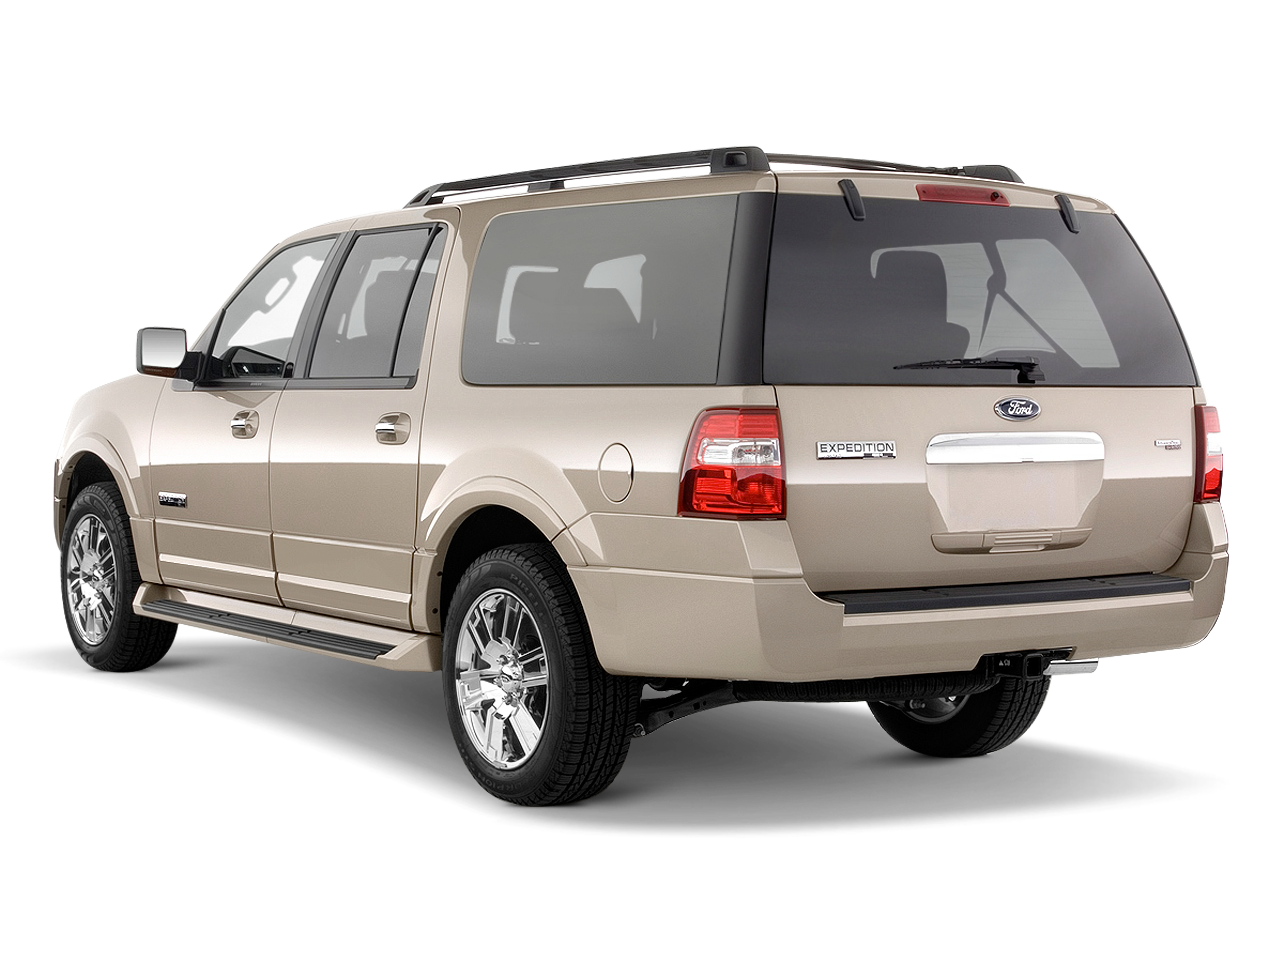 Ford Expedition XLT EL 2013 - International Price & Overview